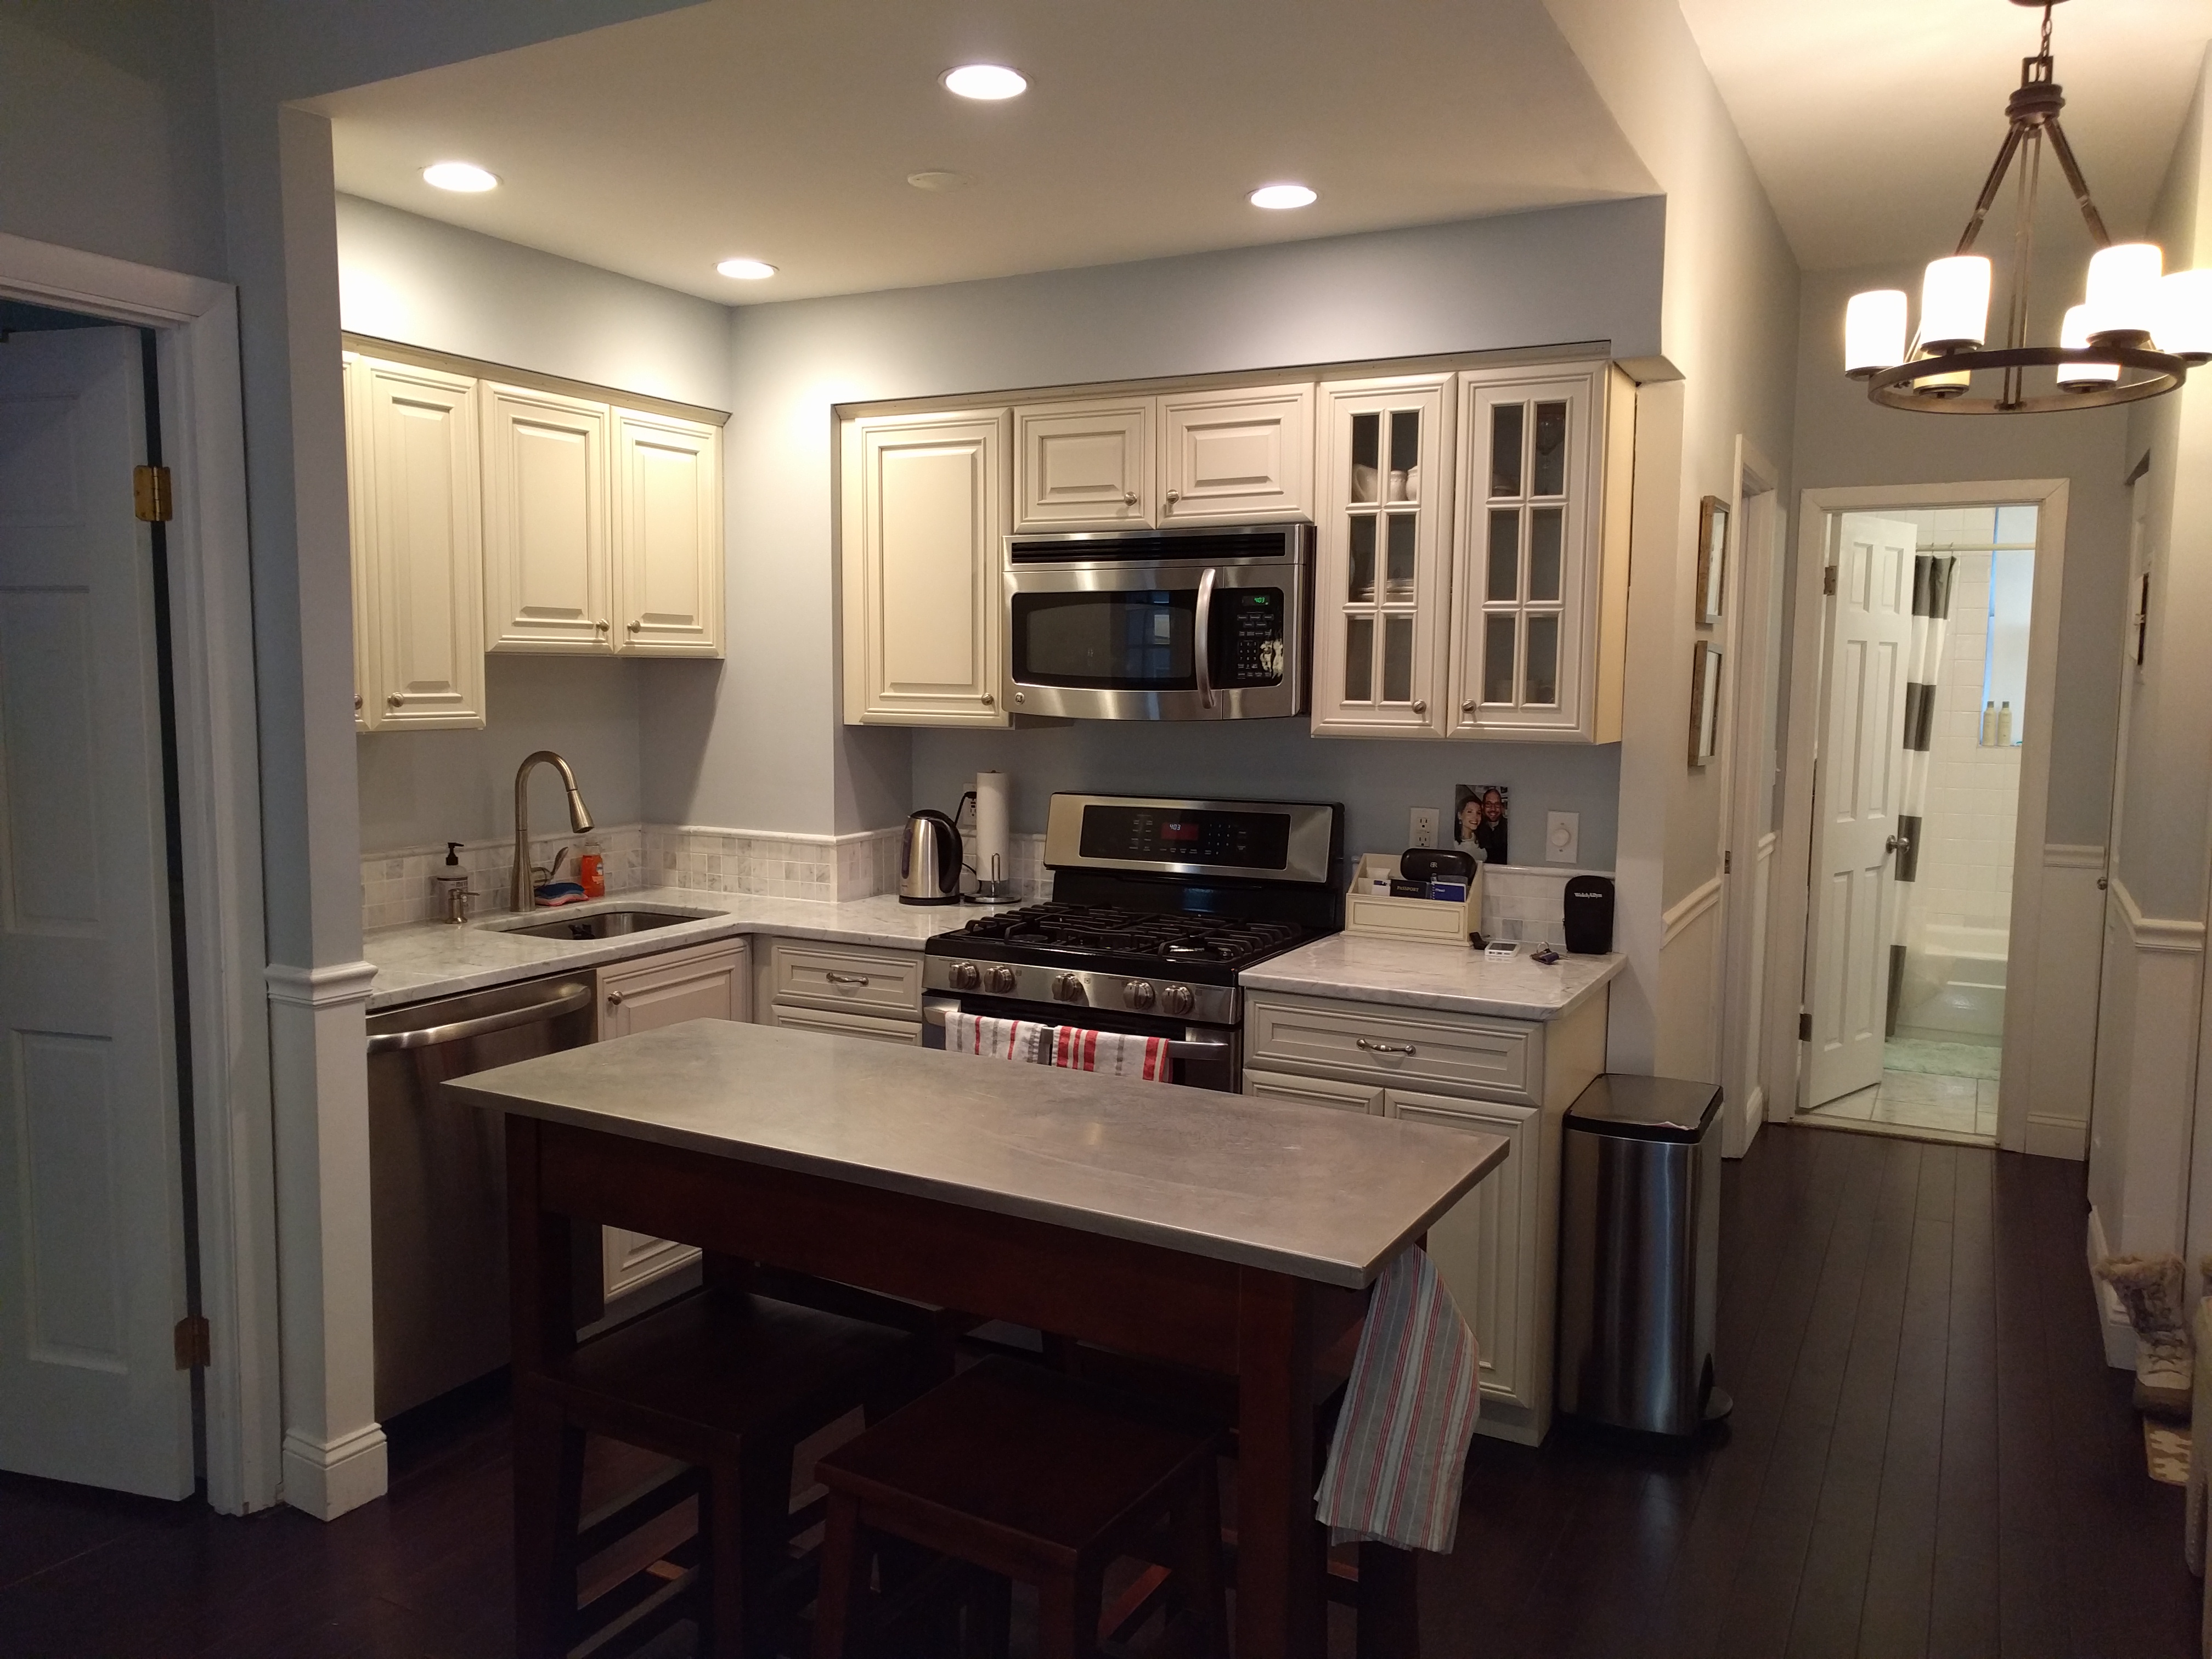 [Off-Market Opportunity] Beacon Hill Beautifully Renovated 2 BR/1 BA